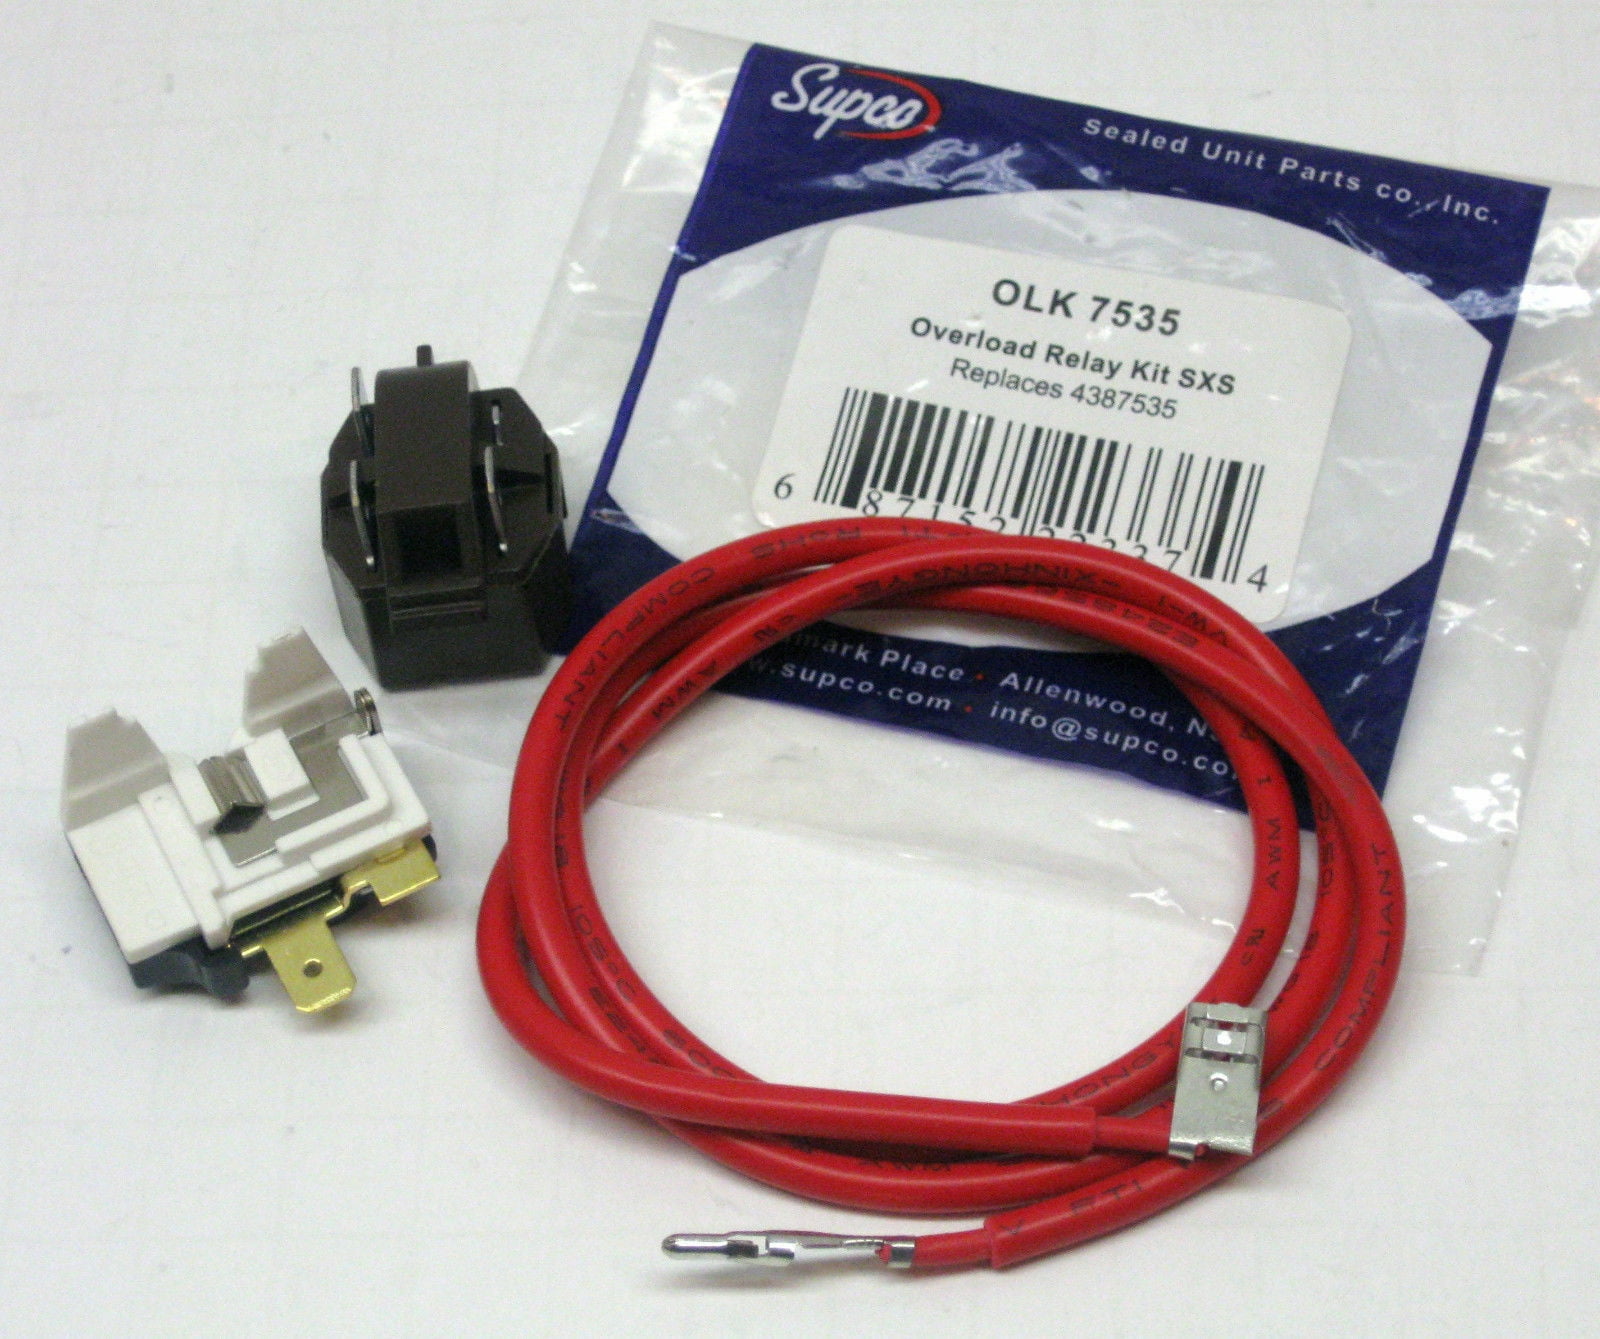 4 Pack 4387535 Refrigerator Relay and Overload Fits Whirlpool Kenmore compressor 